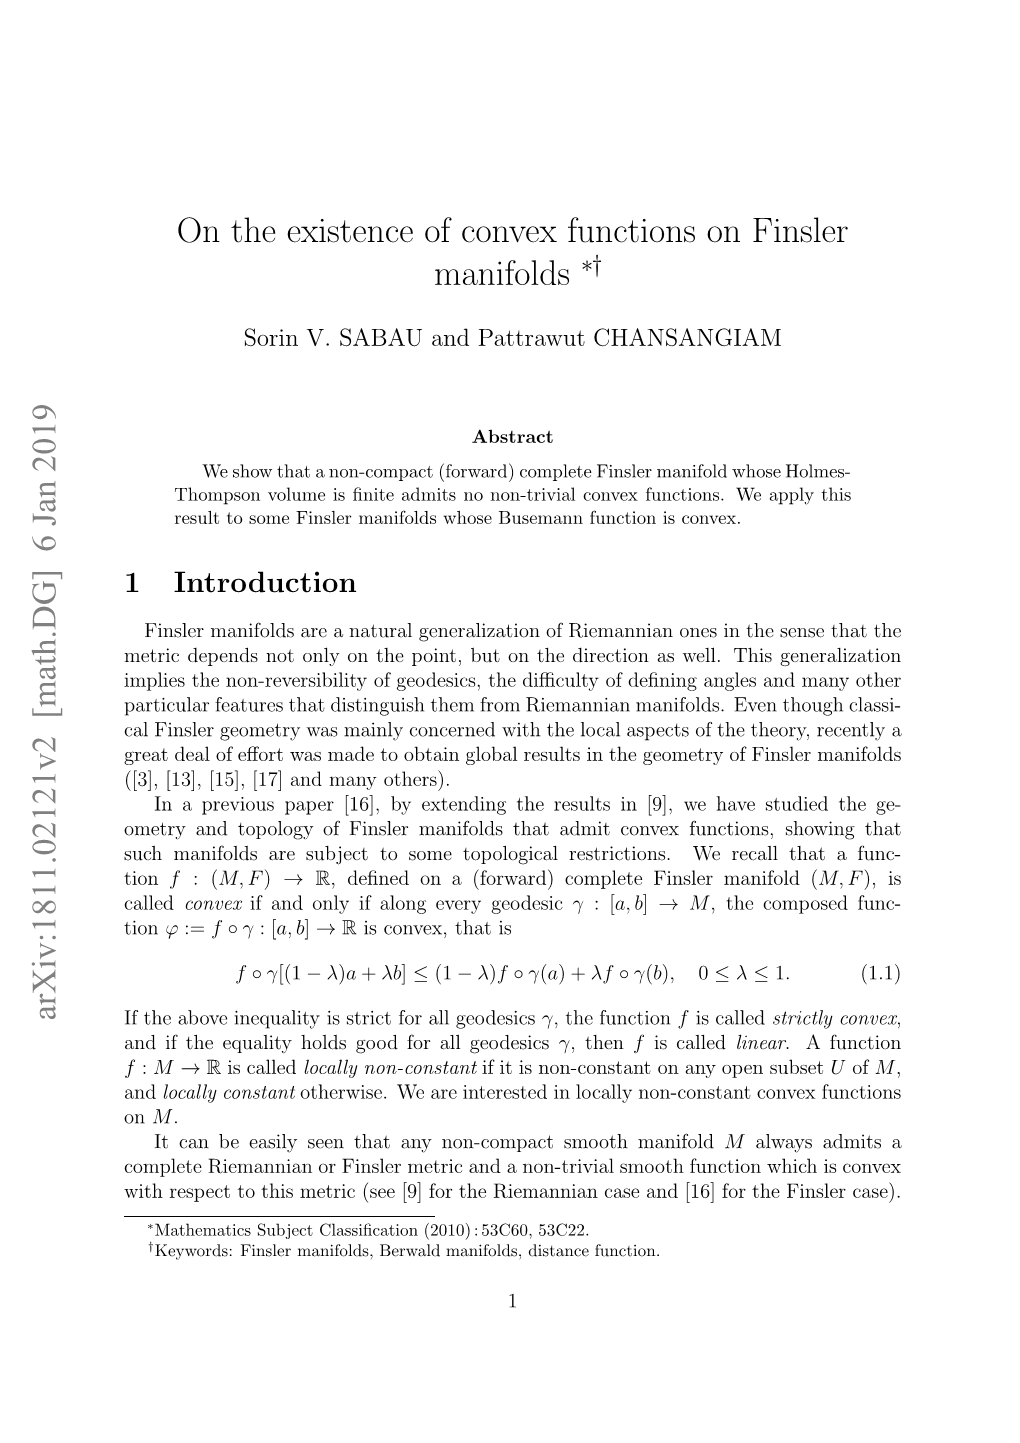 On the Existence of Convex Functions on Finsler Manifolds